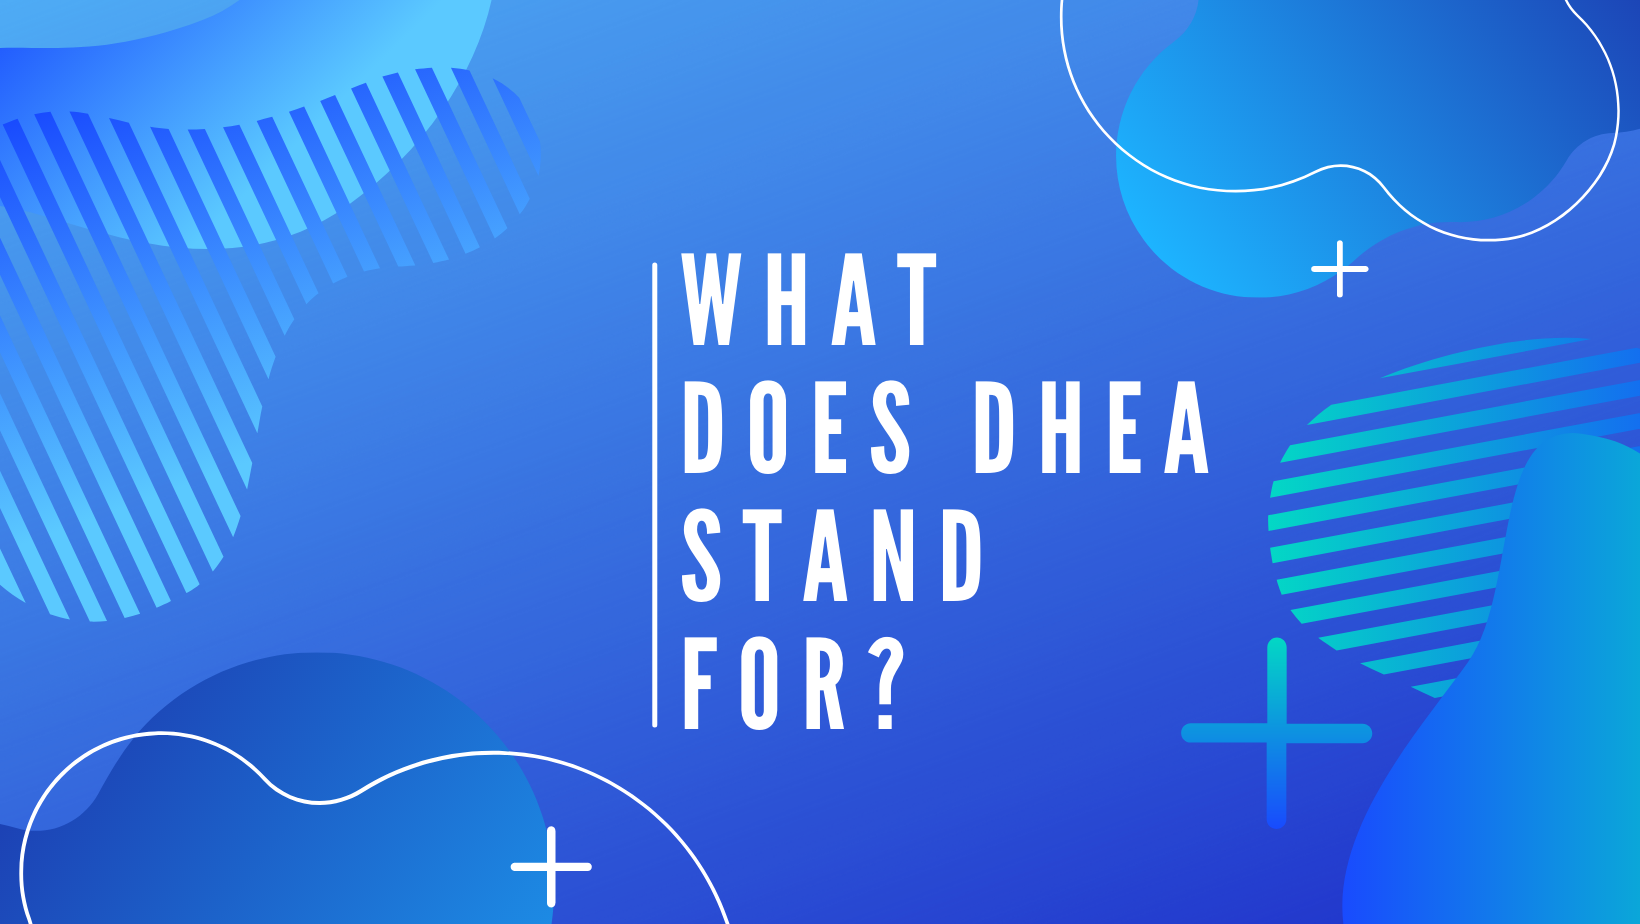 What Does DHEA Stand For?